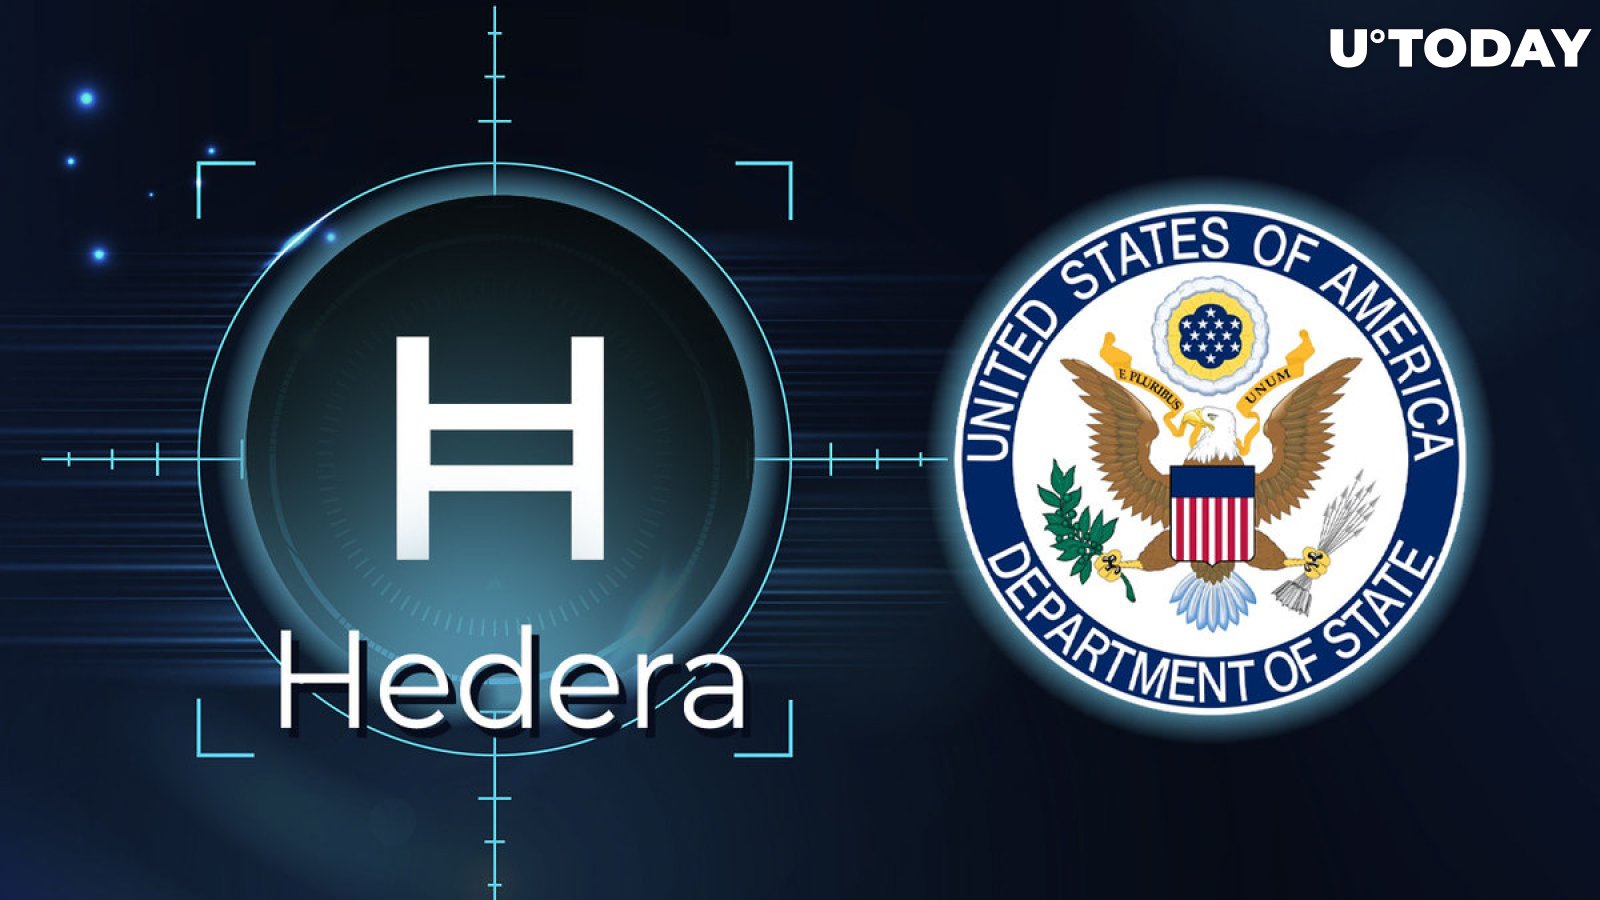 Hedera (HBAR) Recognized by US Government for Role in Human Rights: Details